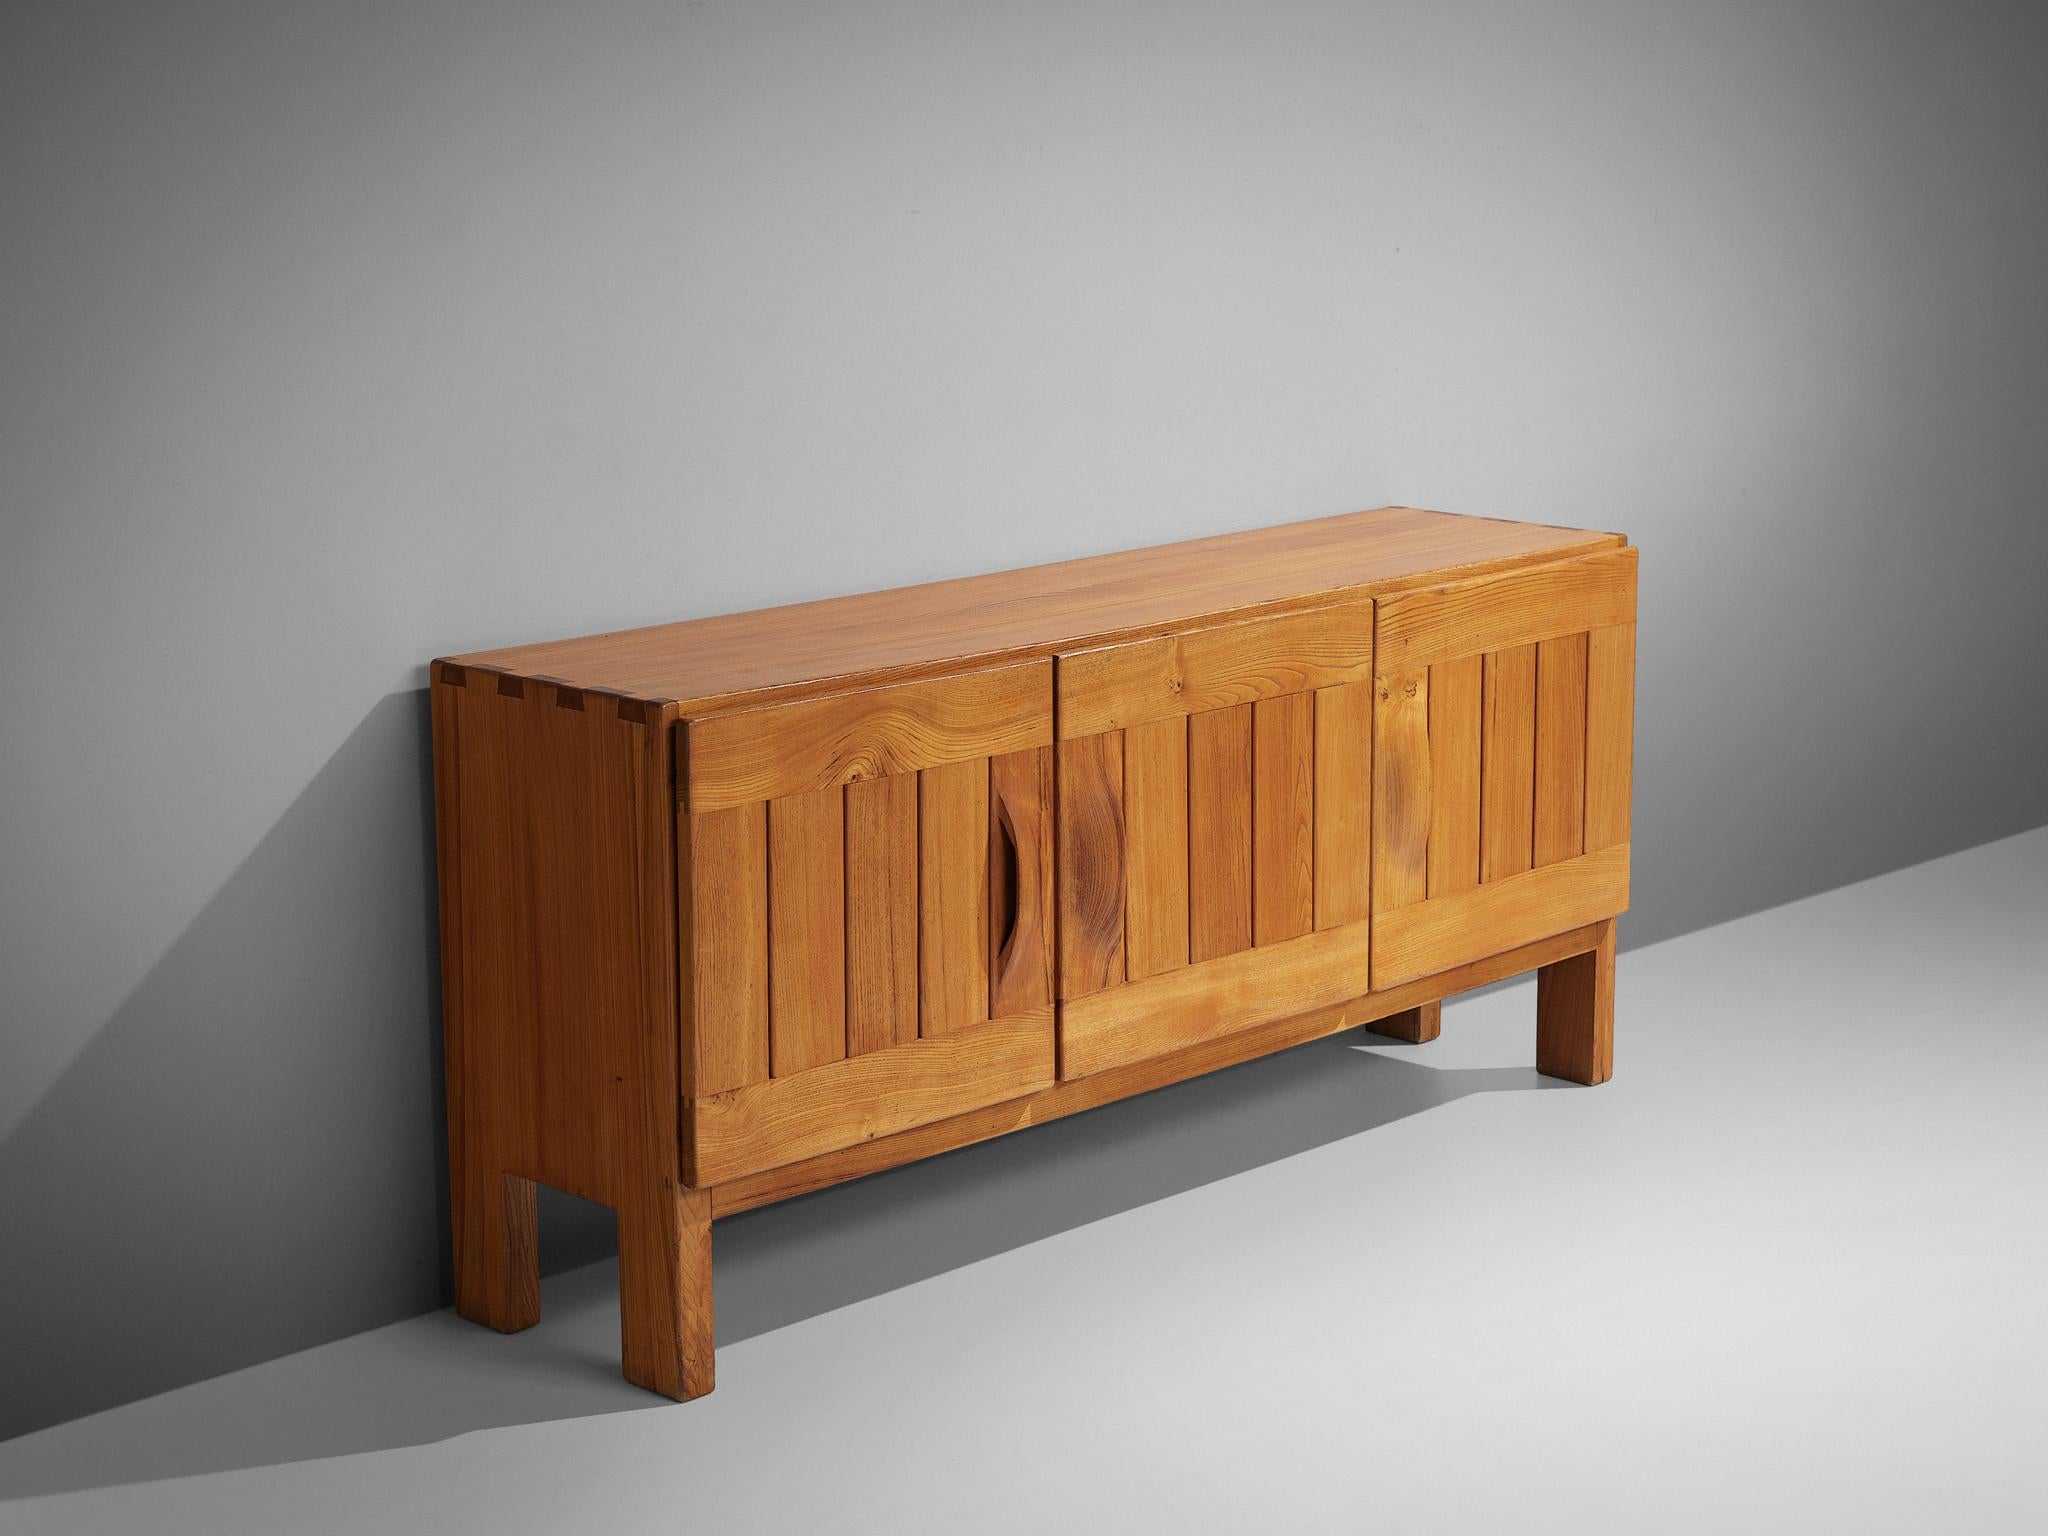 Maison Regain, sideboard, elm, France, 1960s.

This elm credenza combines a simplified yet complex design combined with nifty, solid construction details that characterize Maison Regain's designs. The three well balanced, sturdy doors are